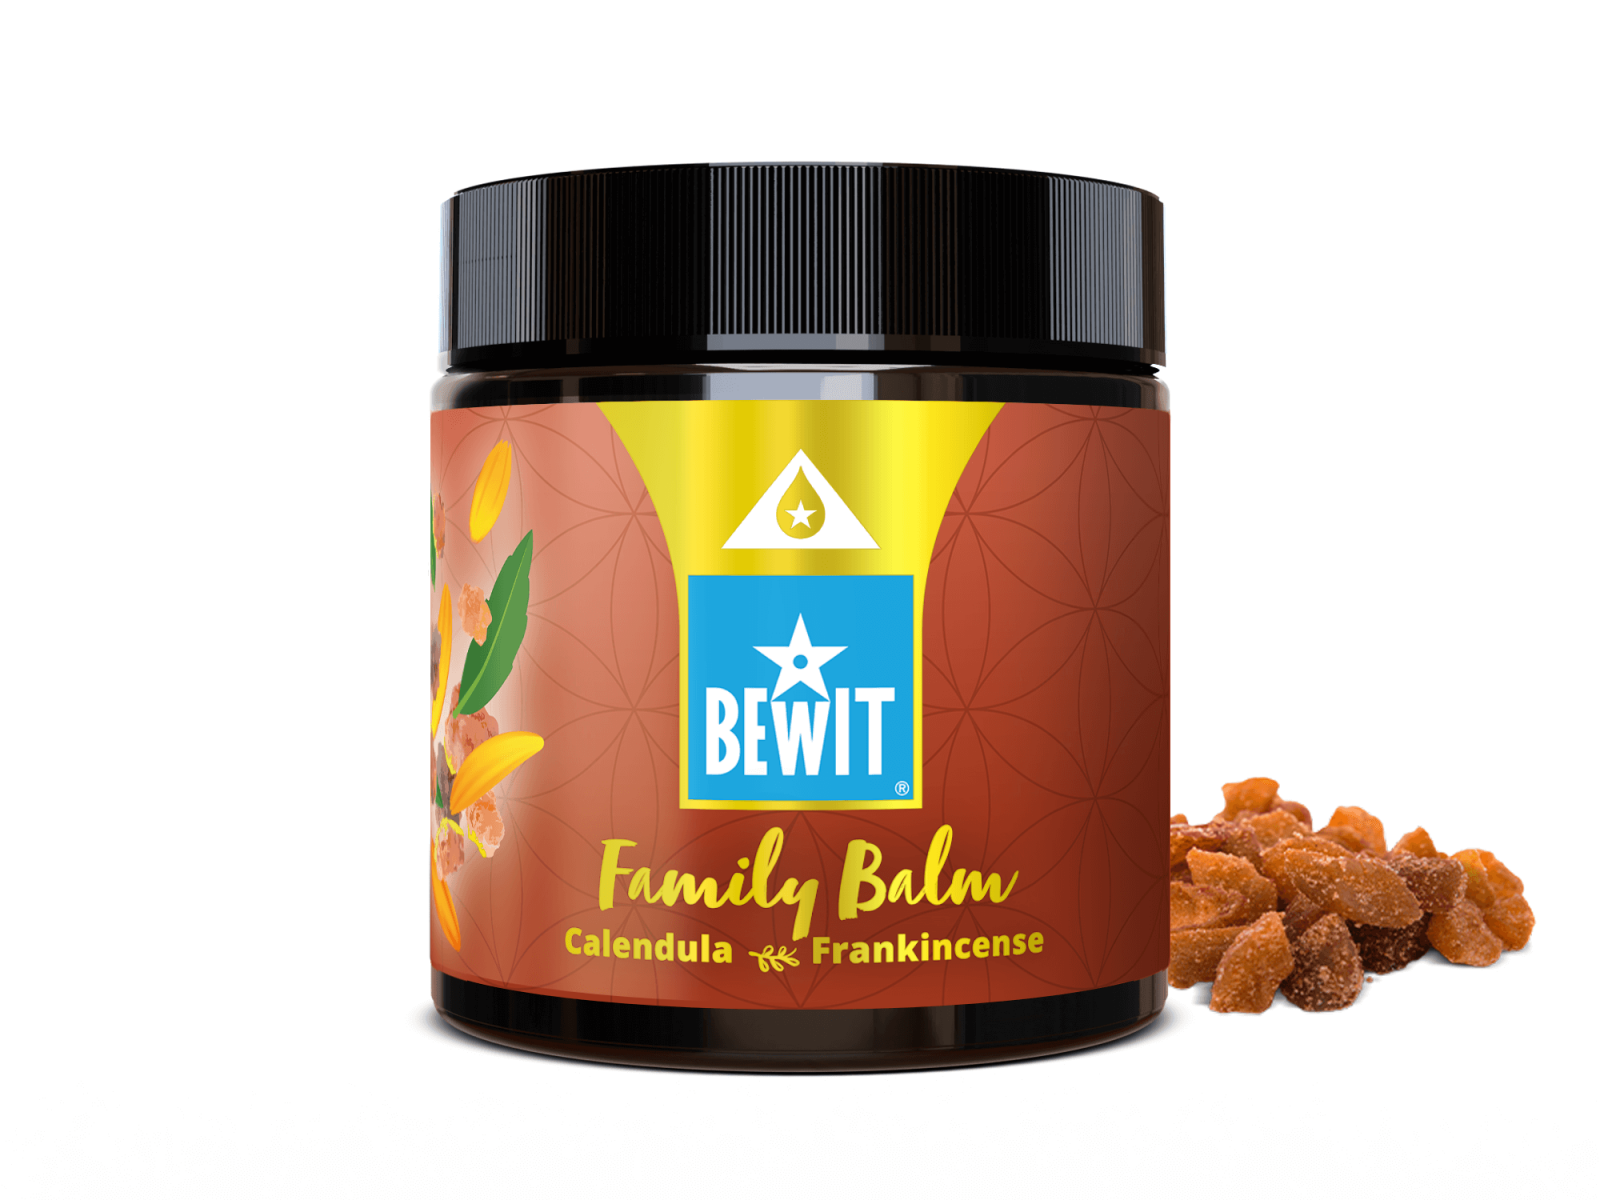 BEWIT FAMILY BALM CALENDULA  FRANKINCENSE - CARING BALM FOR THE WHOLE FAMILY - 1